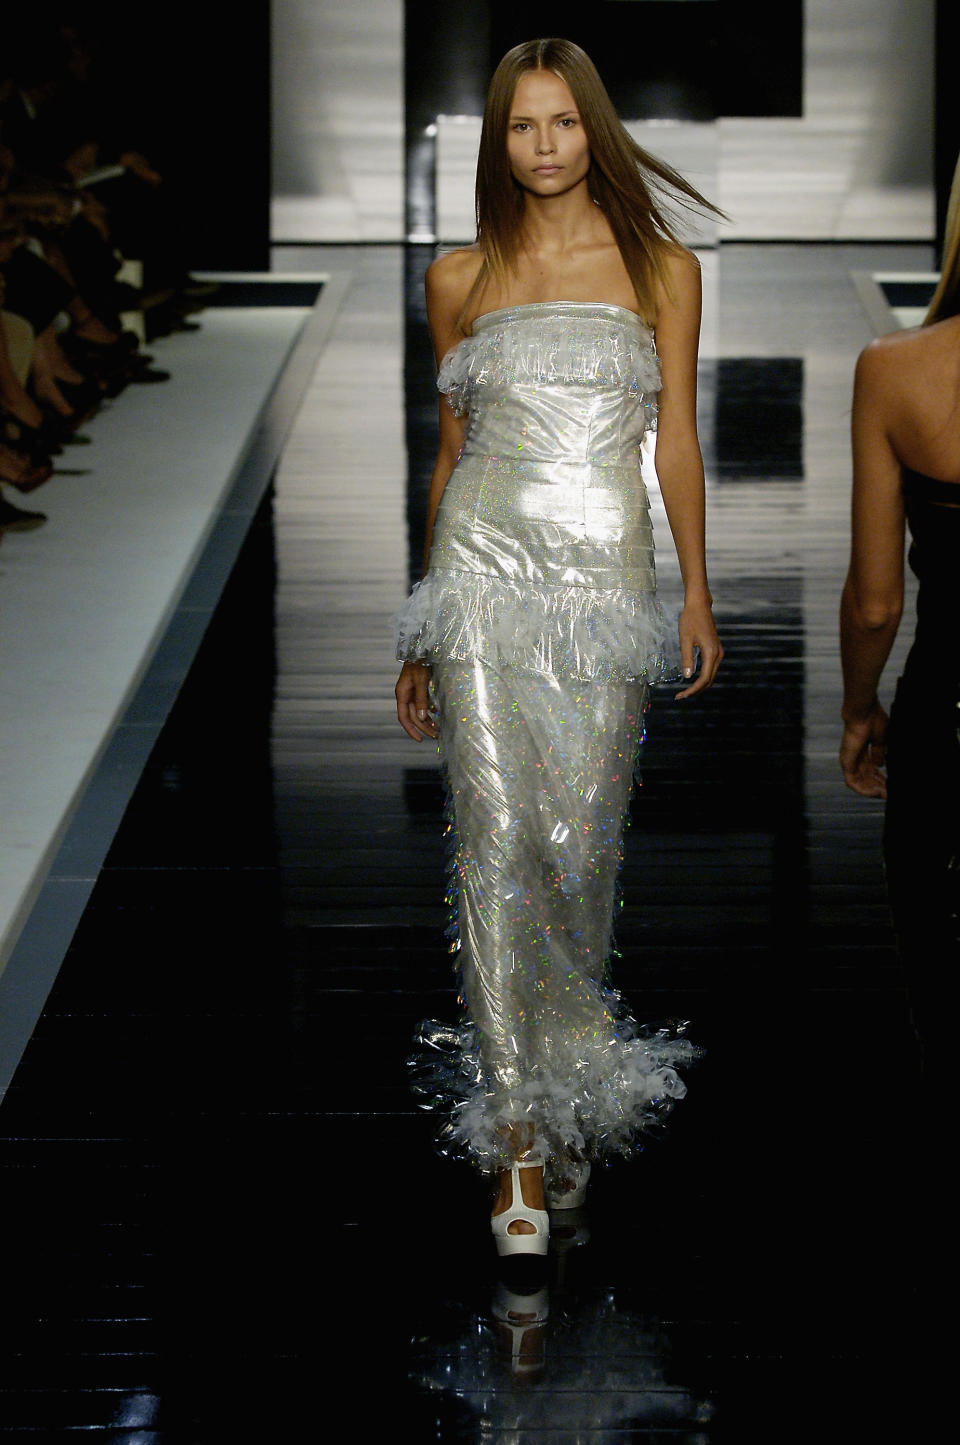 A model walks down the catwalk during the Fendi spring/summer 2007 fashion show in Milan on Sept. 28, 2006.&nbsp;